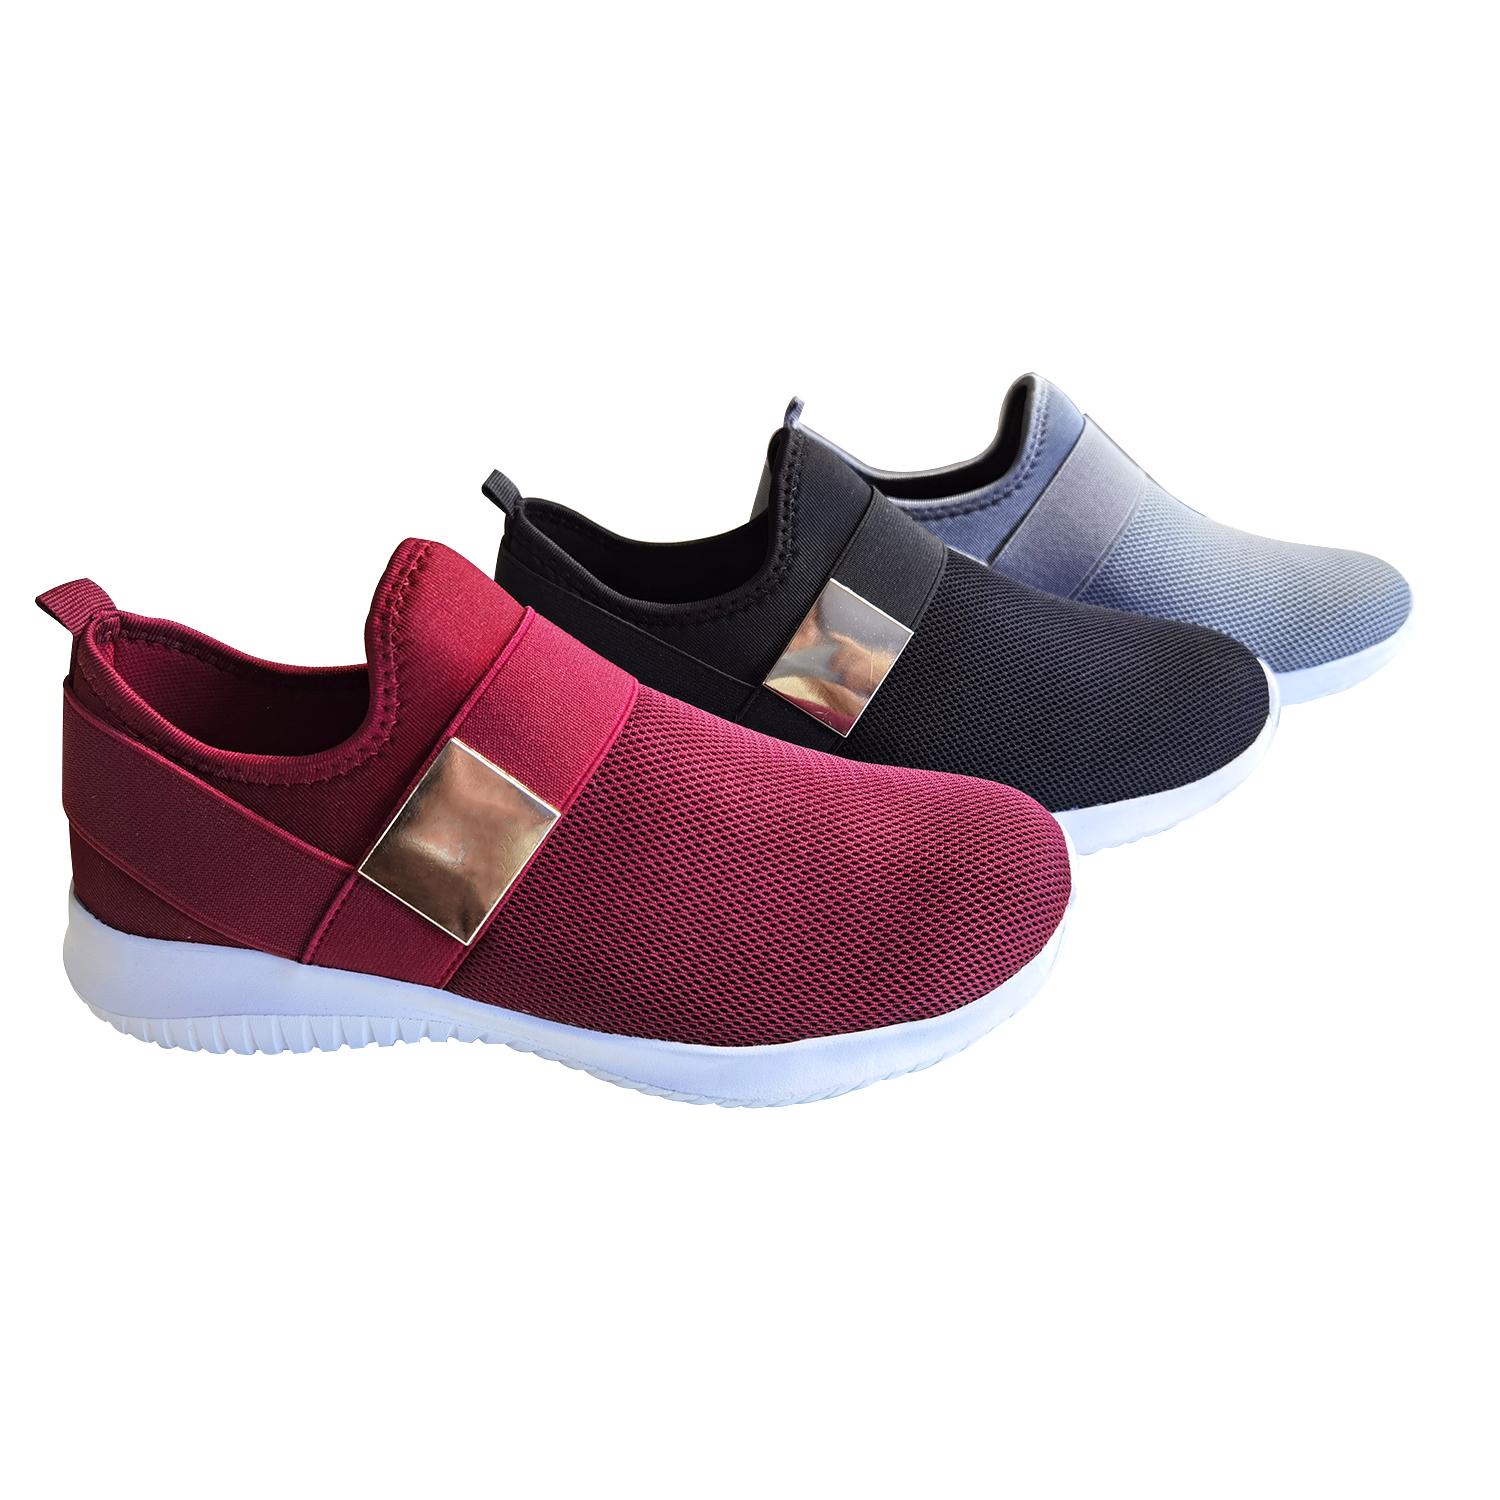 Women's Slip On Loafers Walking Shoes Breathable Mesh Slip On Lightweight Casual Sneakers